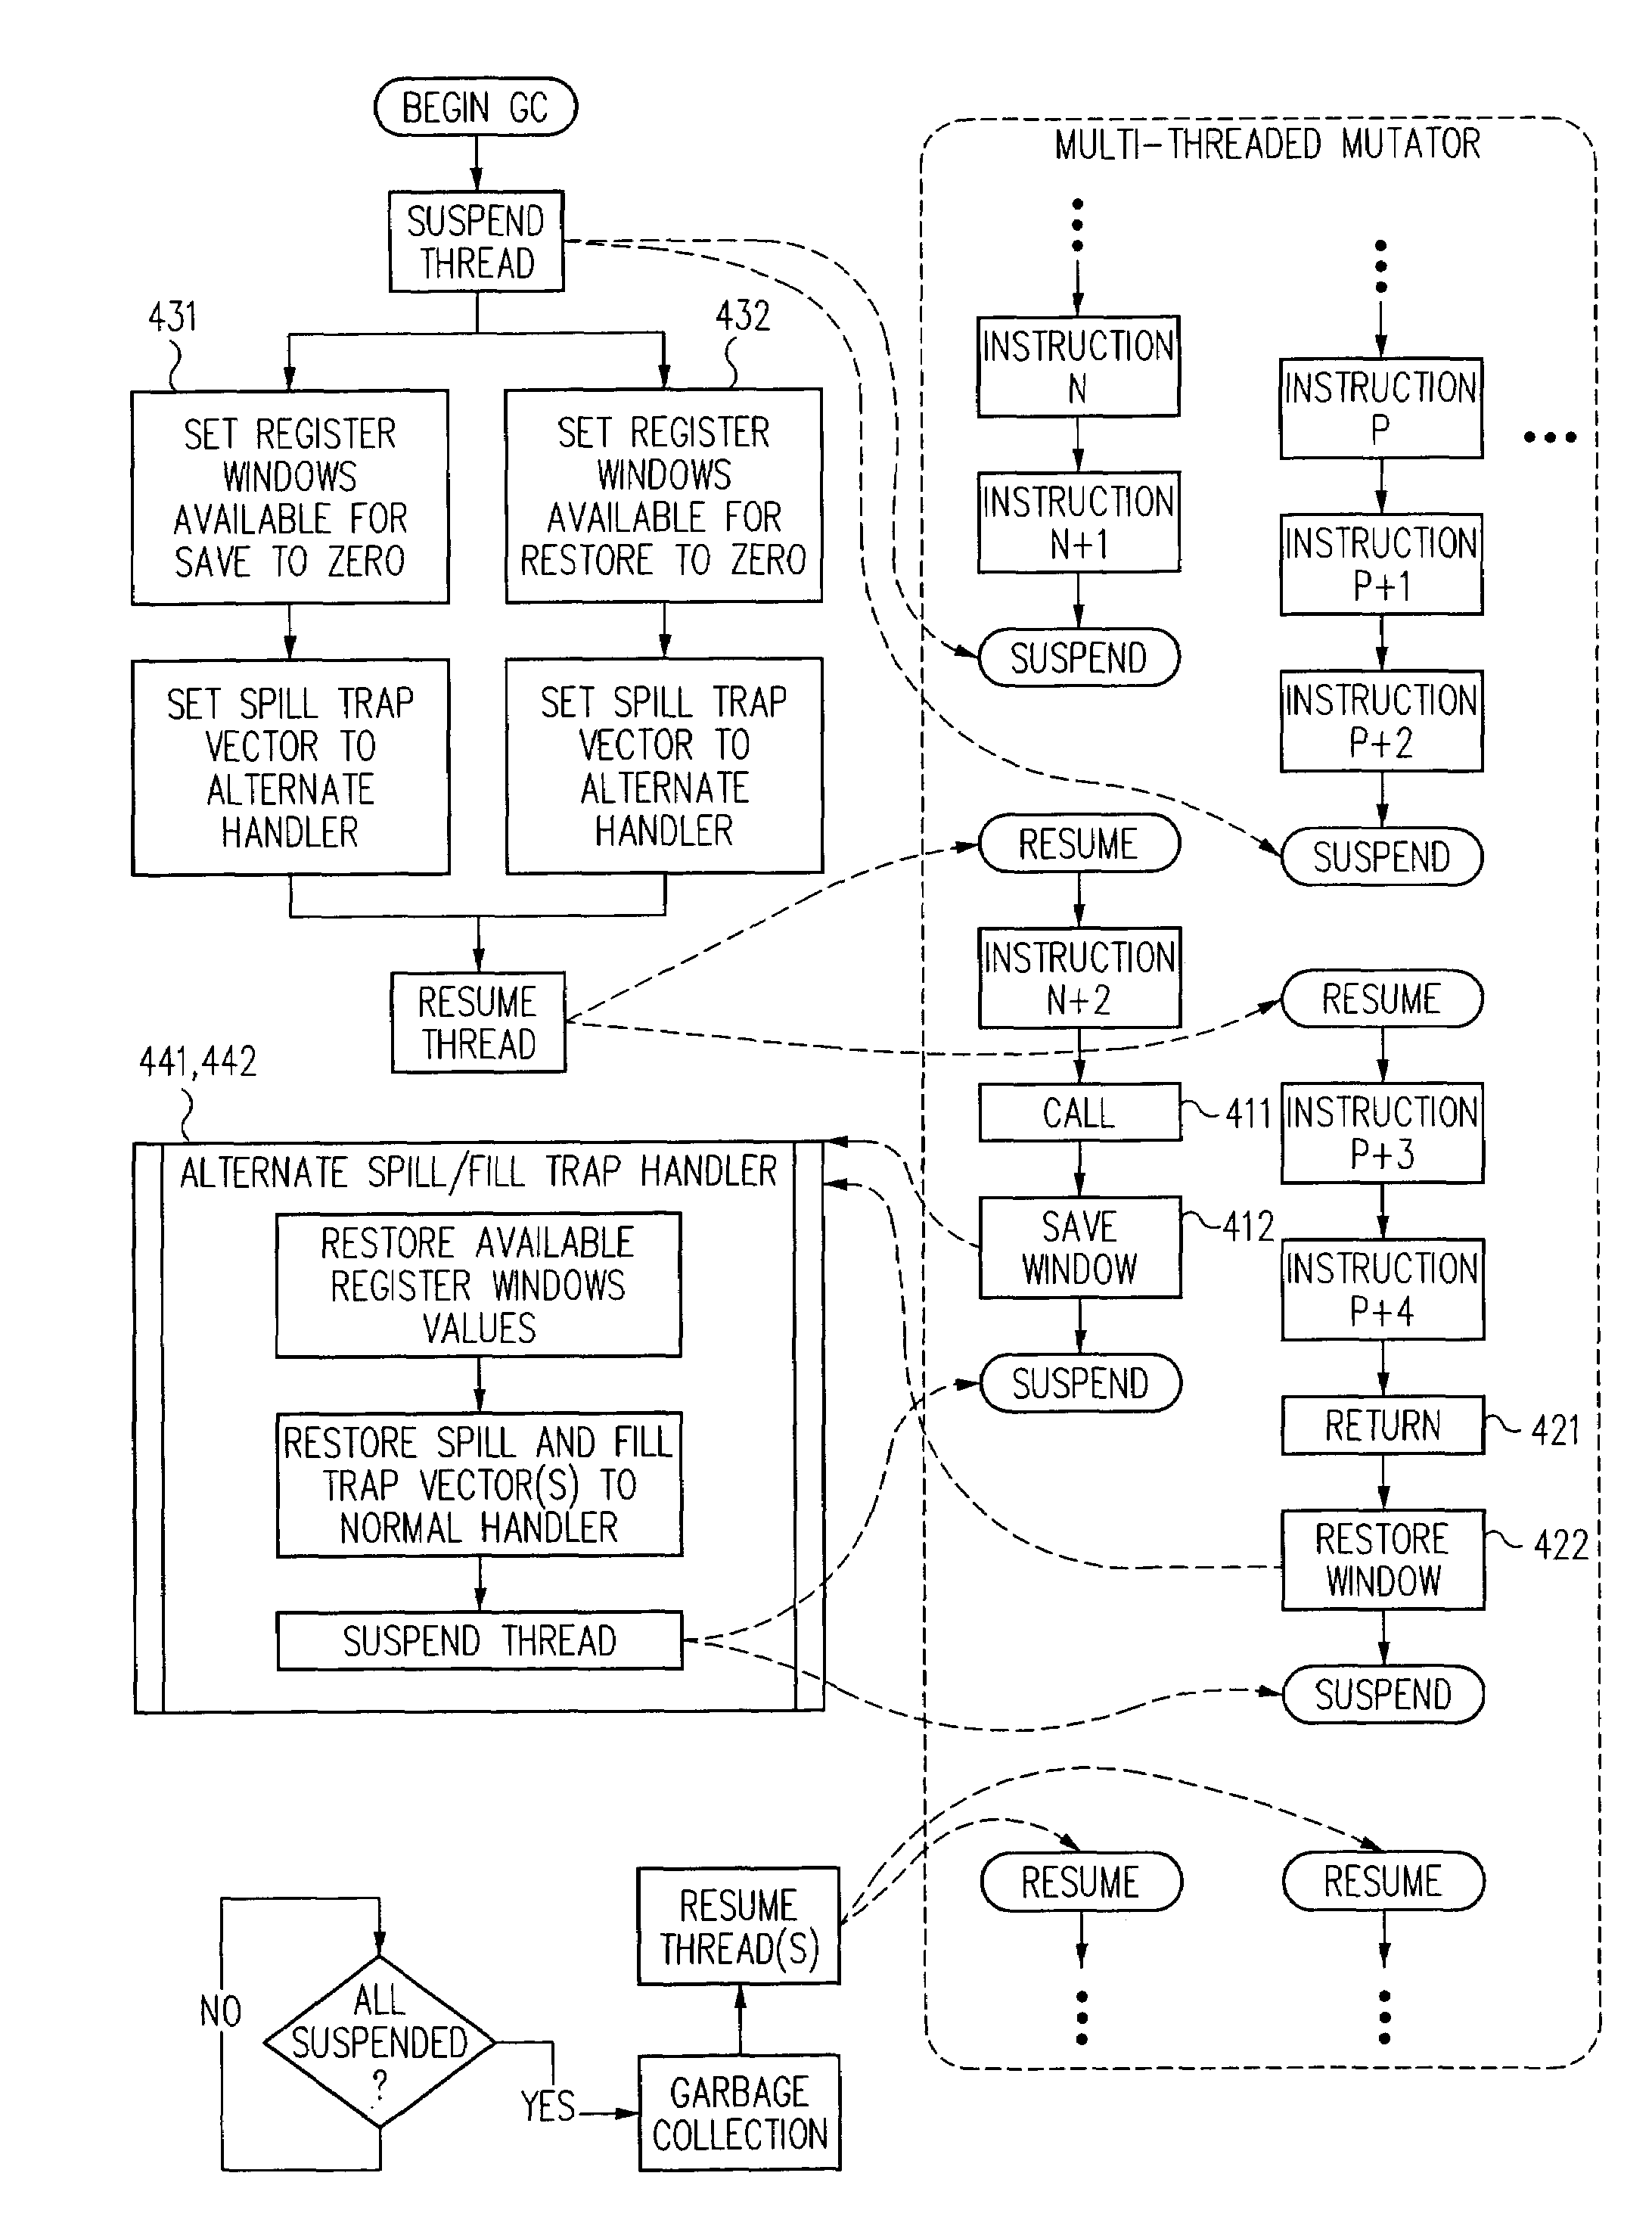 Thread suspension and method in a multi-threaded environment